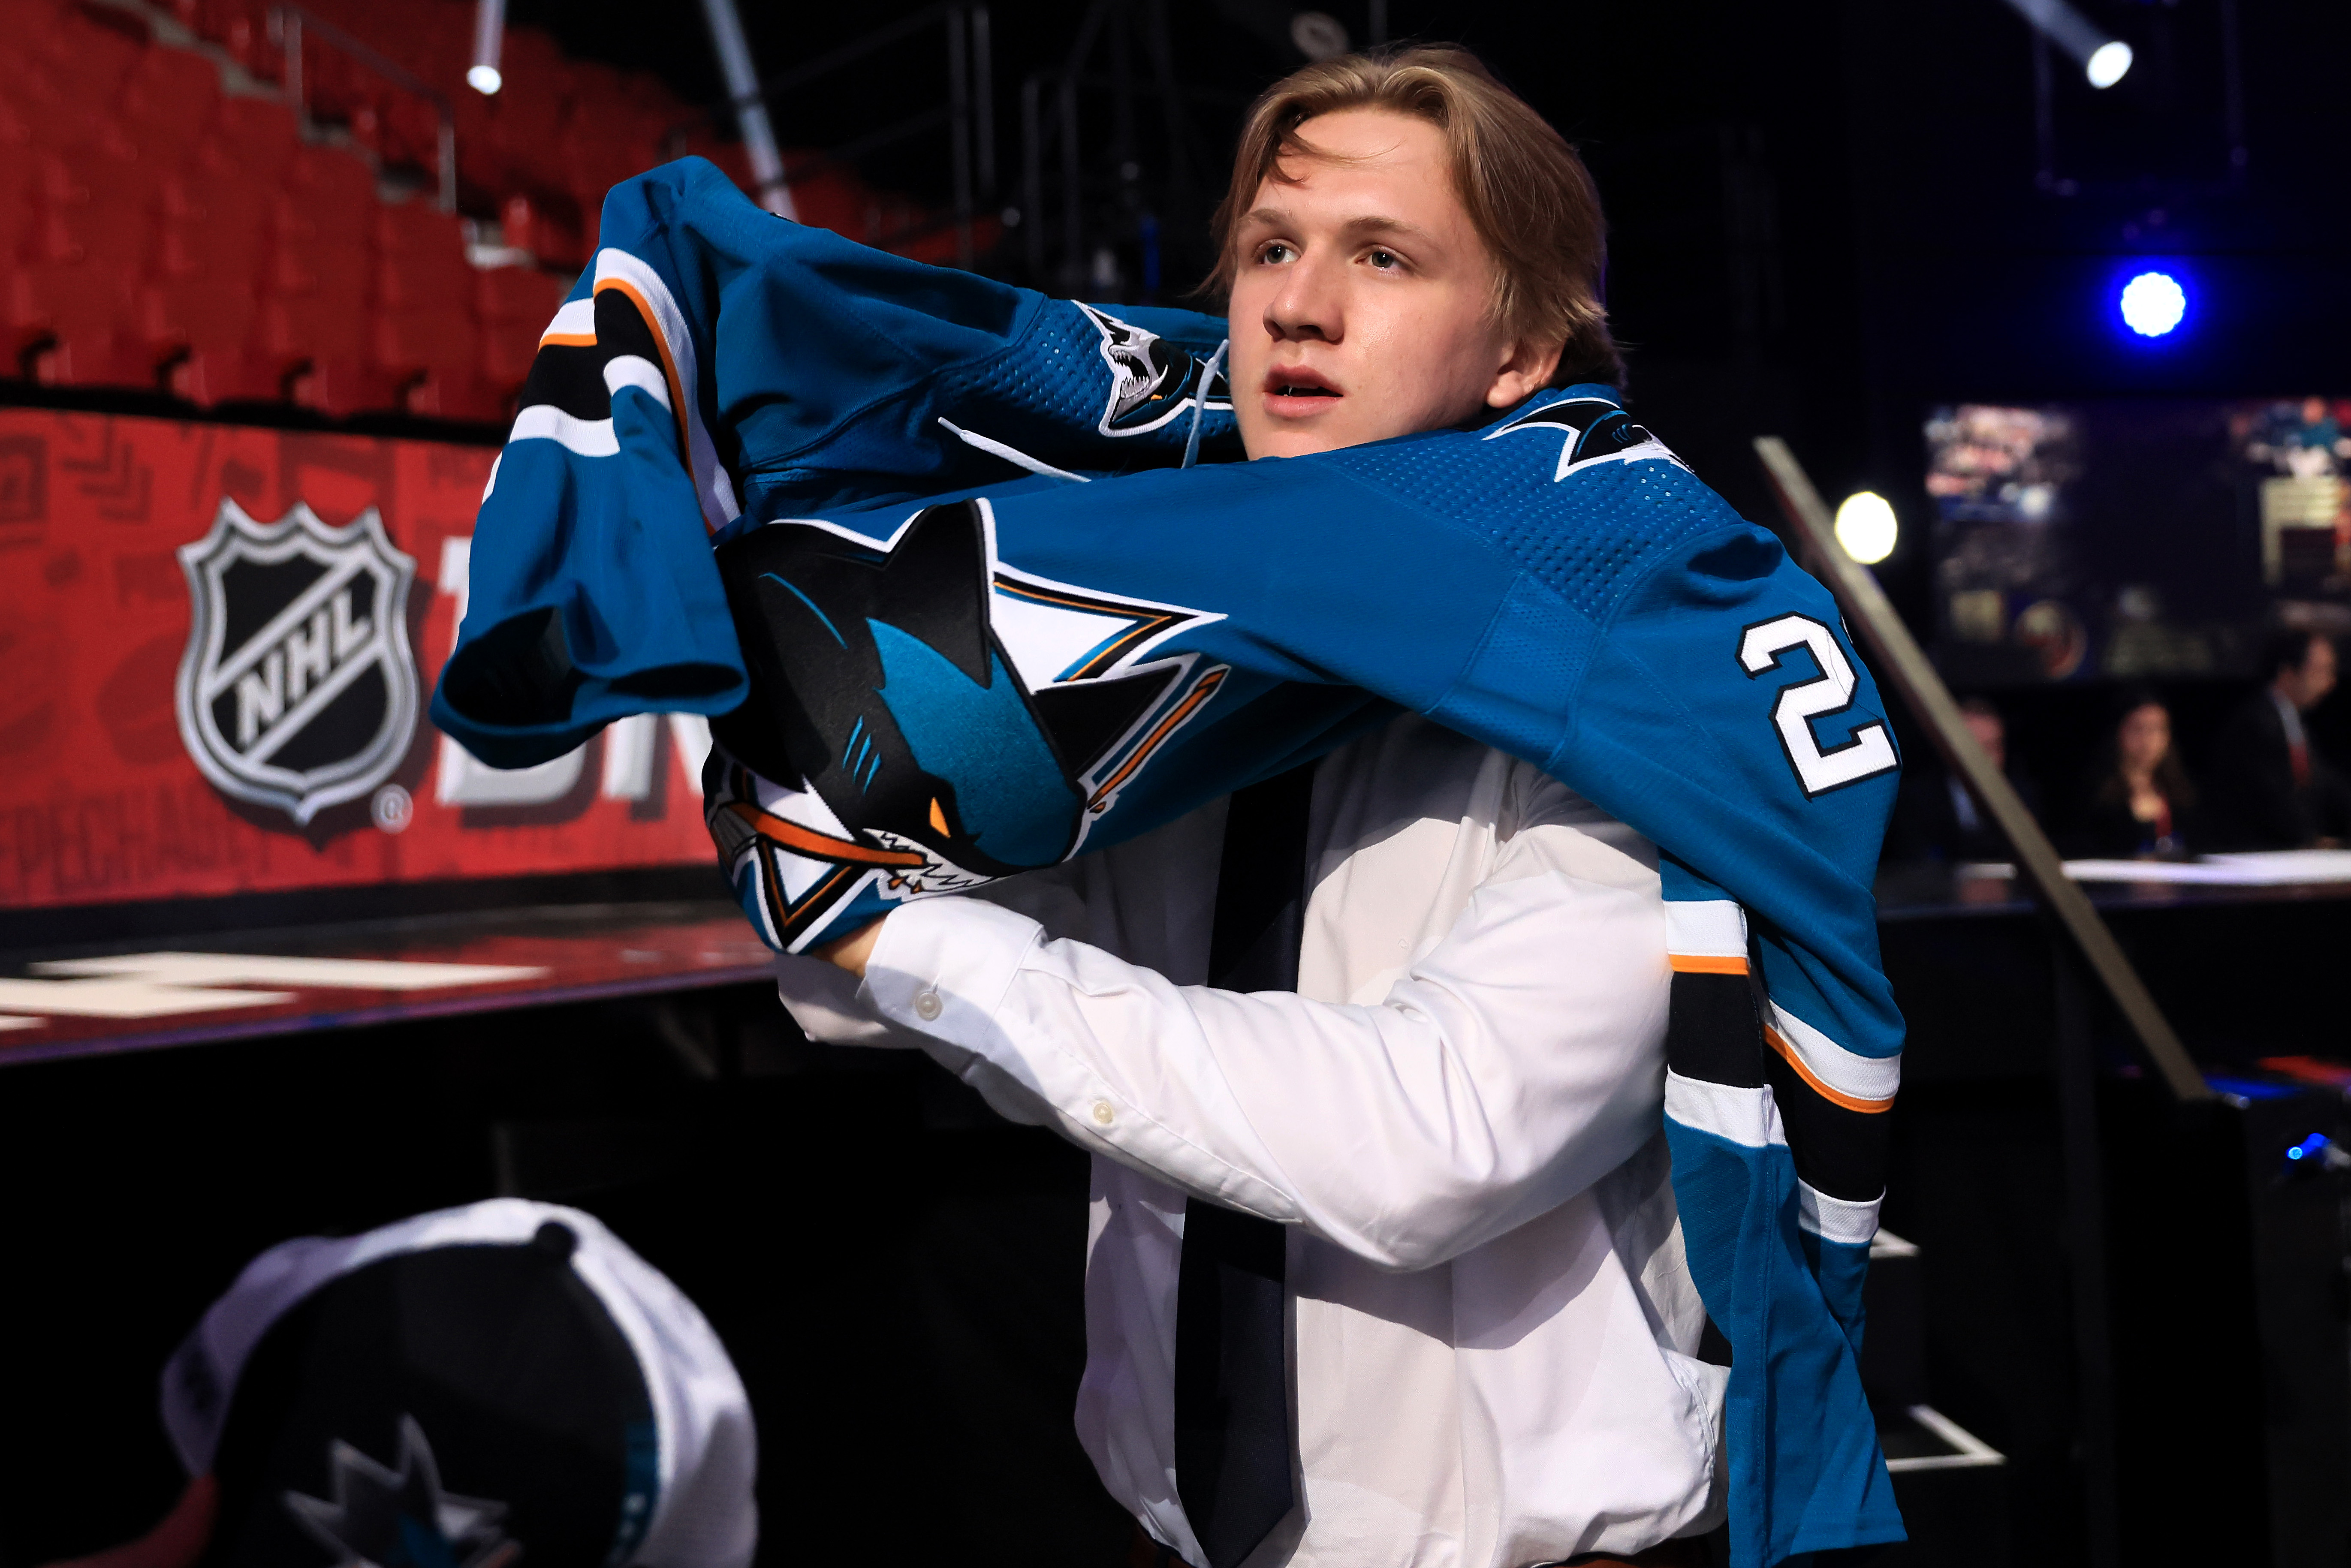 Jake Furlong is selected by the San Jose Sharks during Round Five of the 2022 Upper Deck NHL Draft at Bell Centre on July 08, 2022 in Montreal, Quebec, Canada.